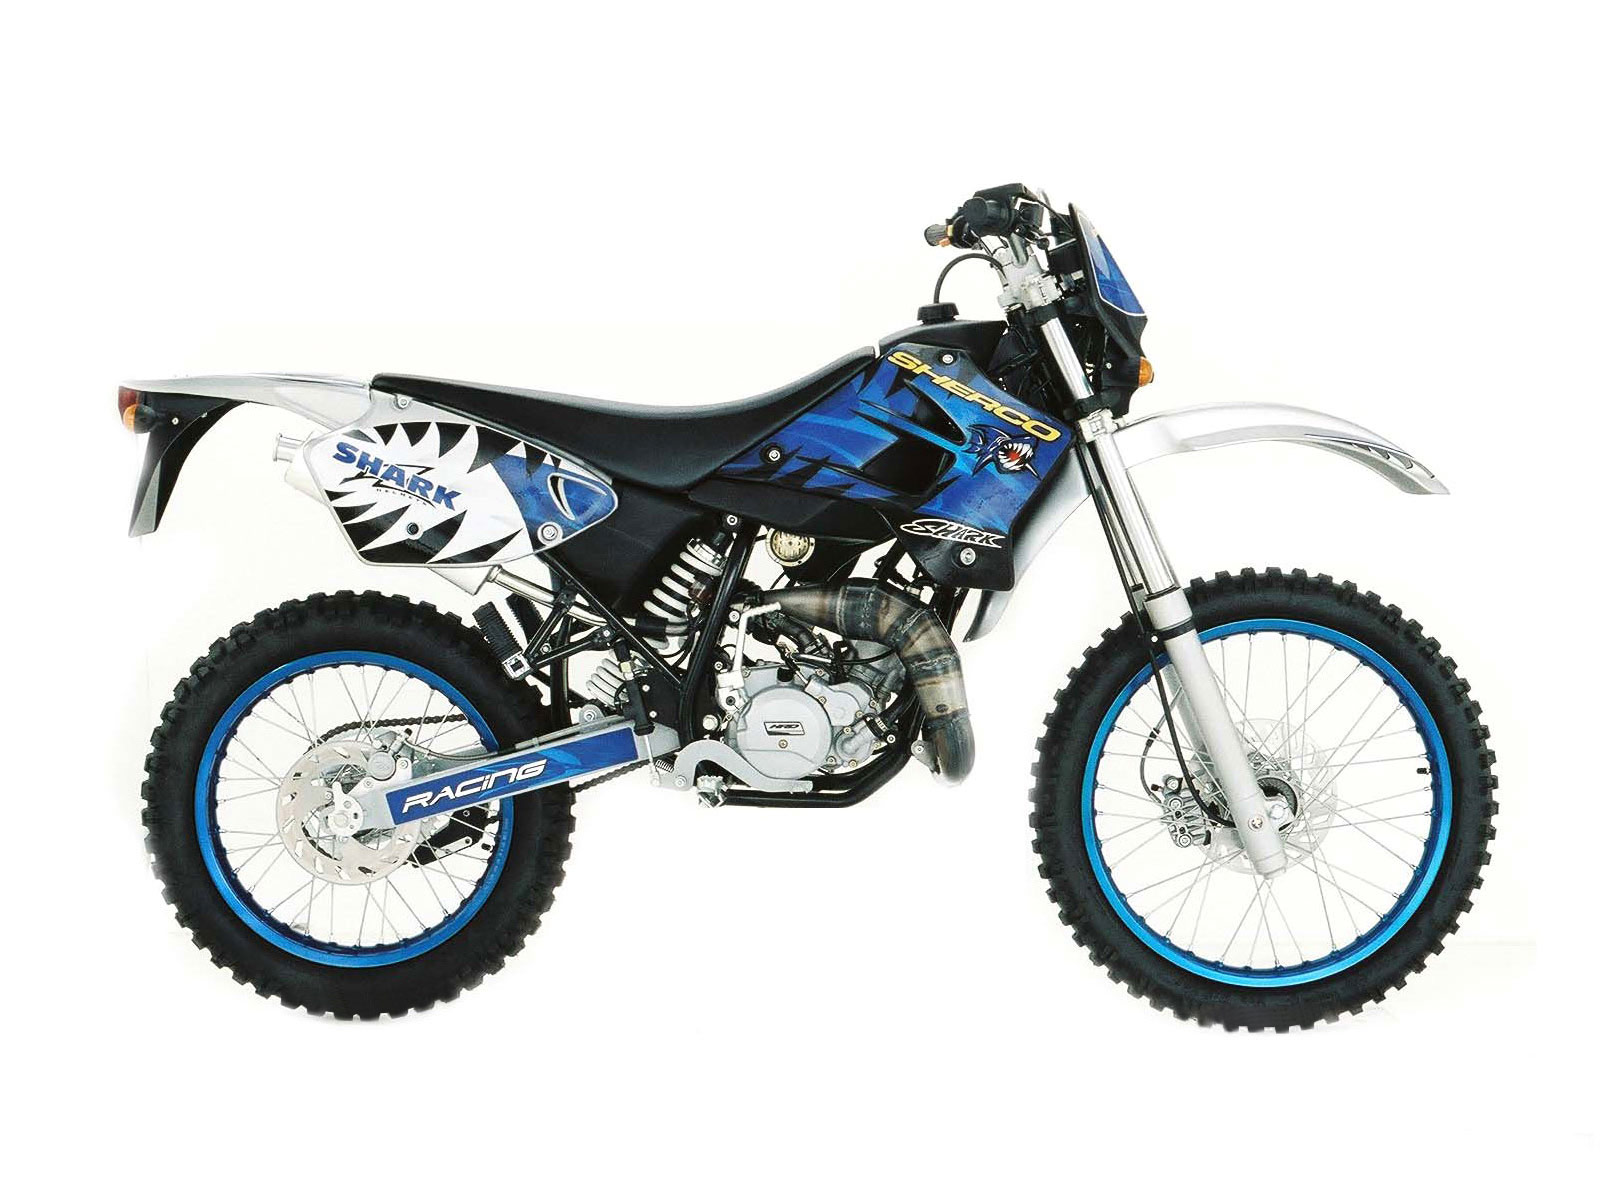 All Brands Of Motorcycles Here SHERCO Shark Replica Enduro 2006